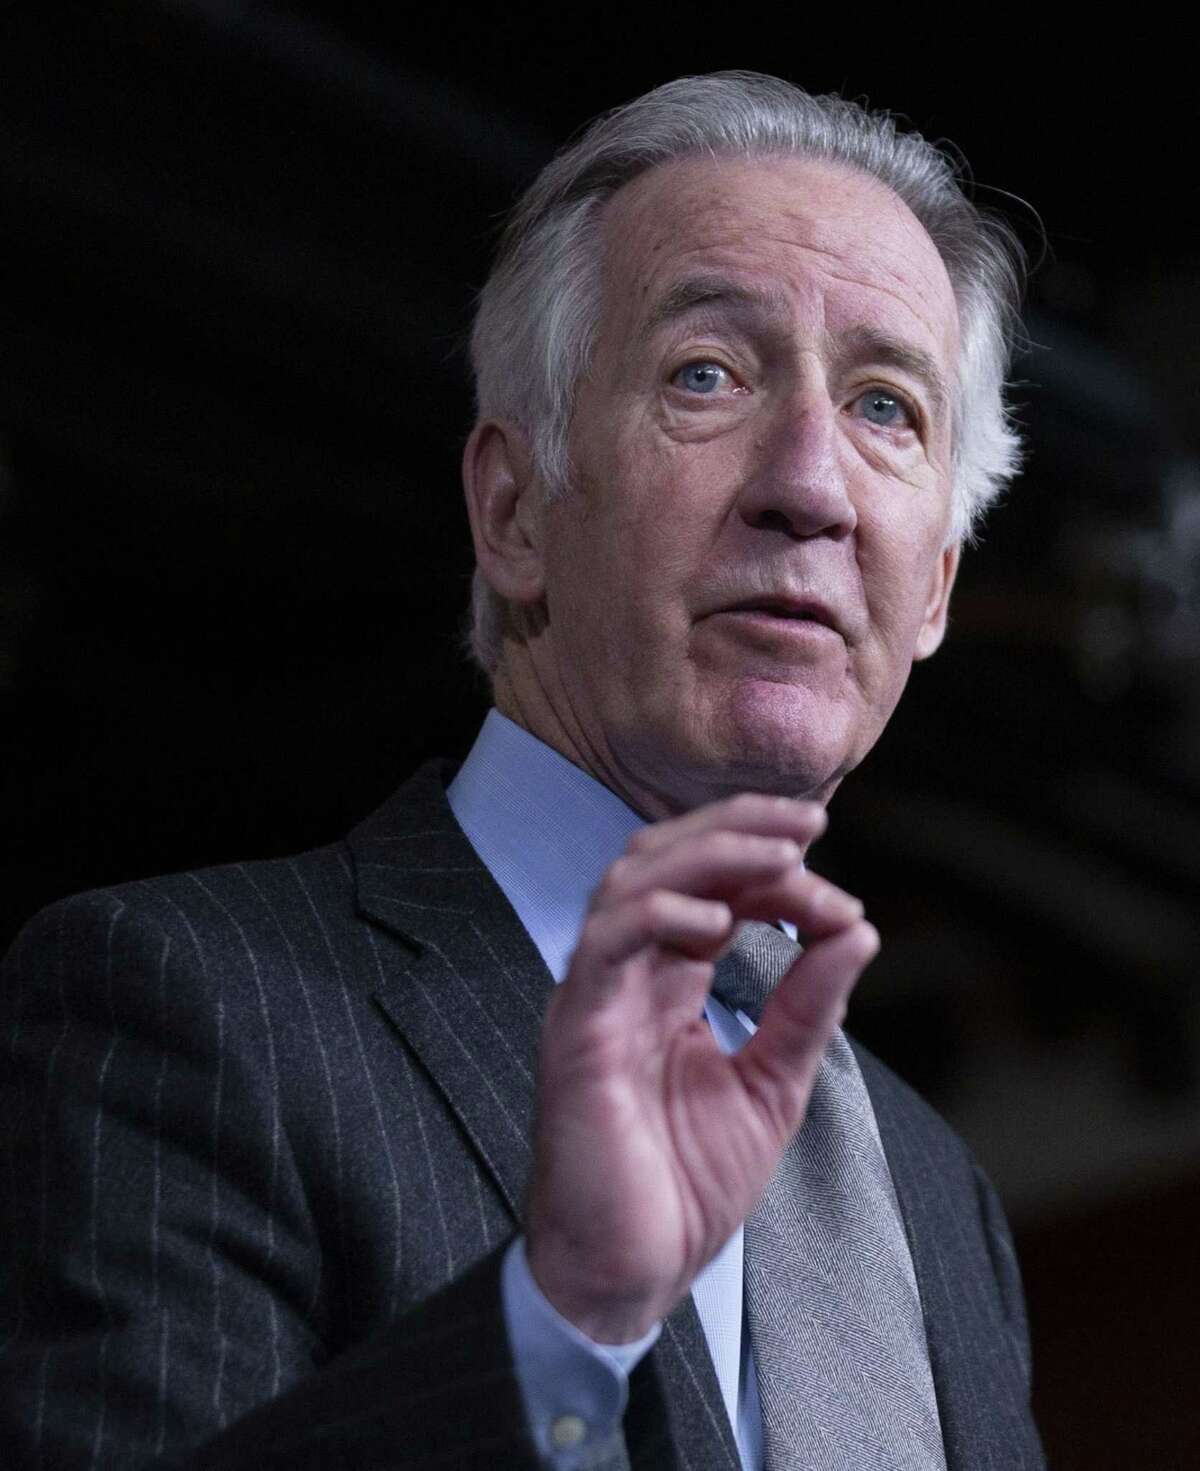 Rep. Richard Neal, D-Mass., during a news conference at the U.S. Capitol in Washington D.C., on Jan. 29, 2020.